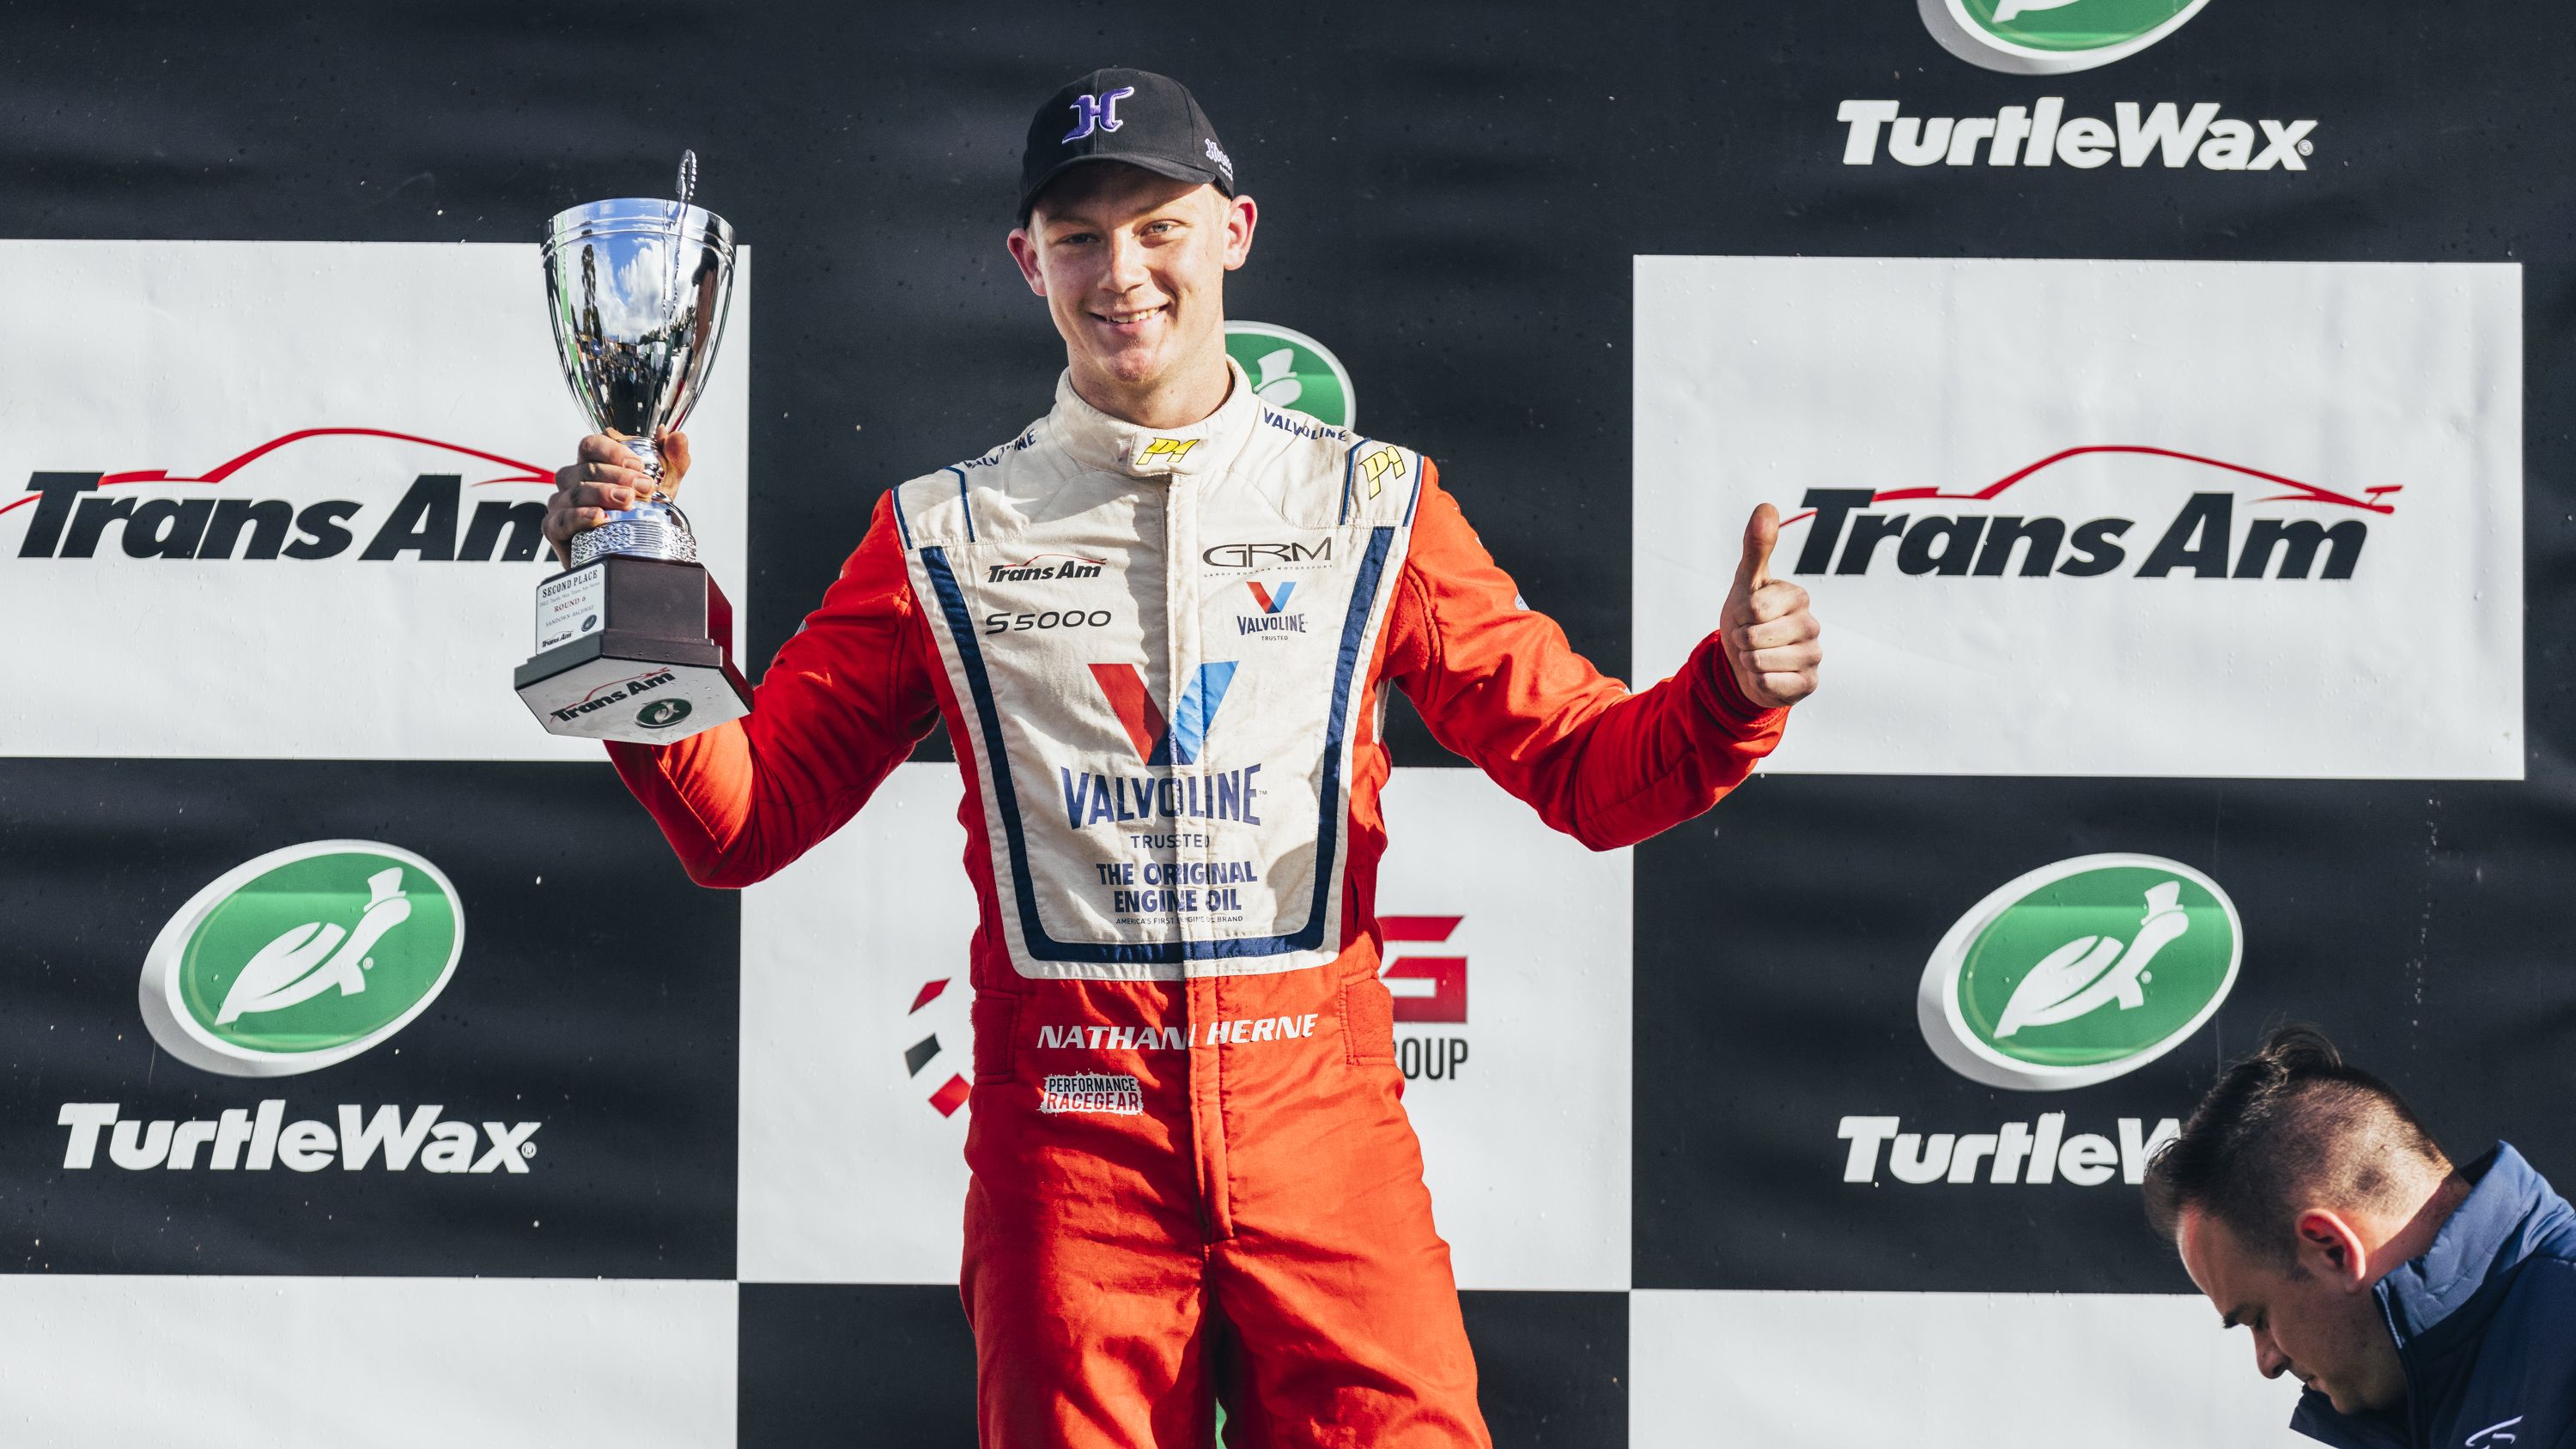 Nathan Herne expresses relief after tense conclusion to Trans Am title win